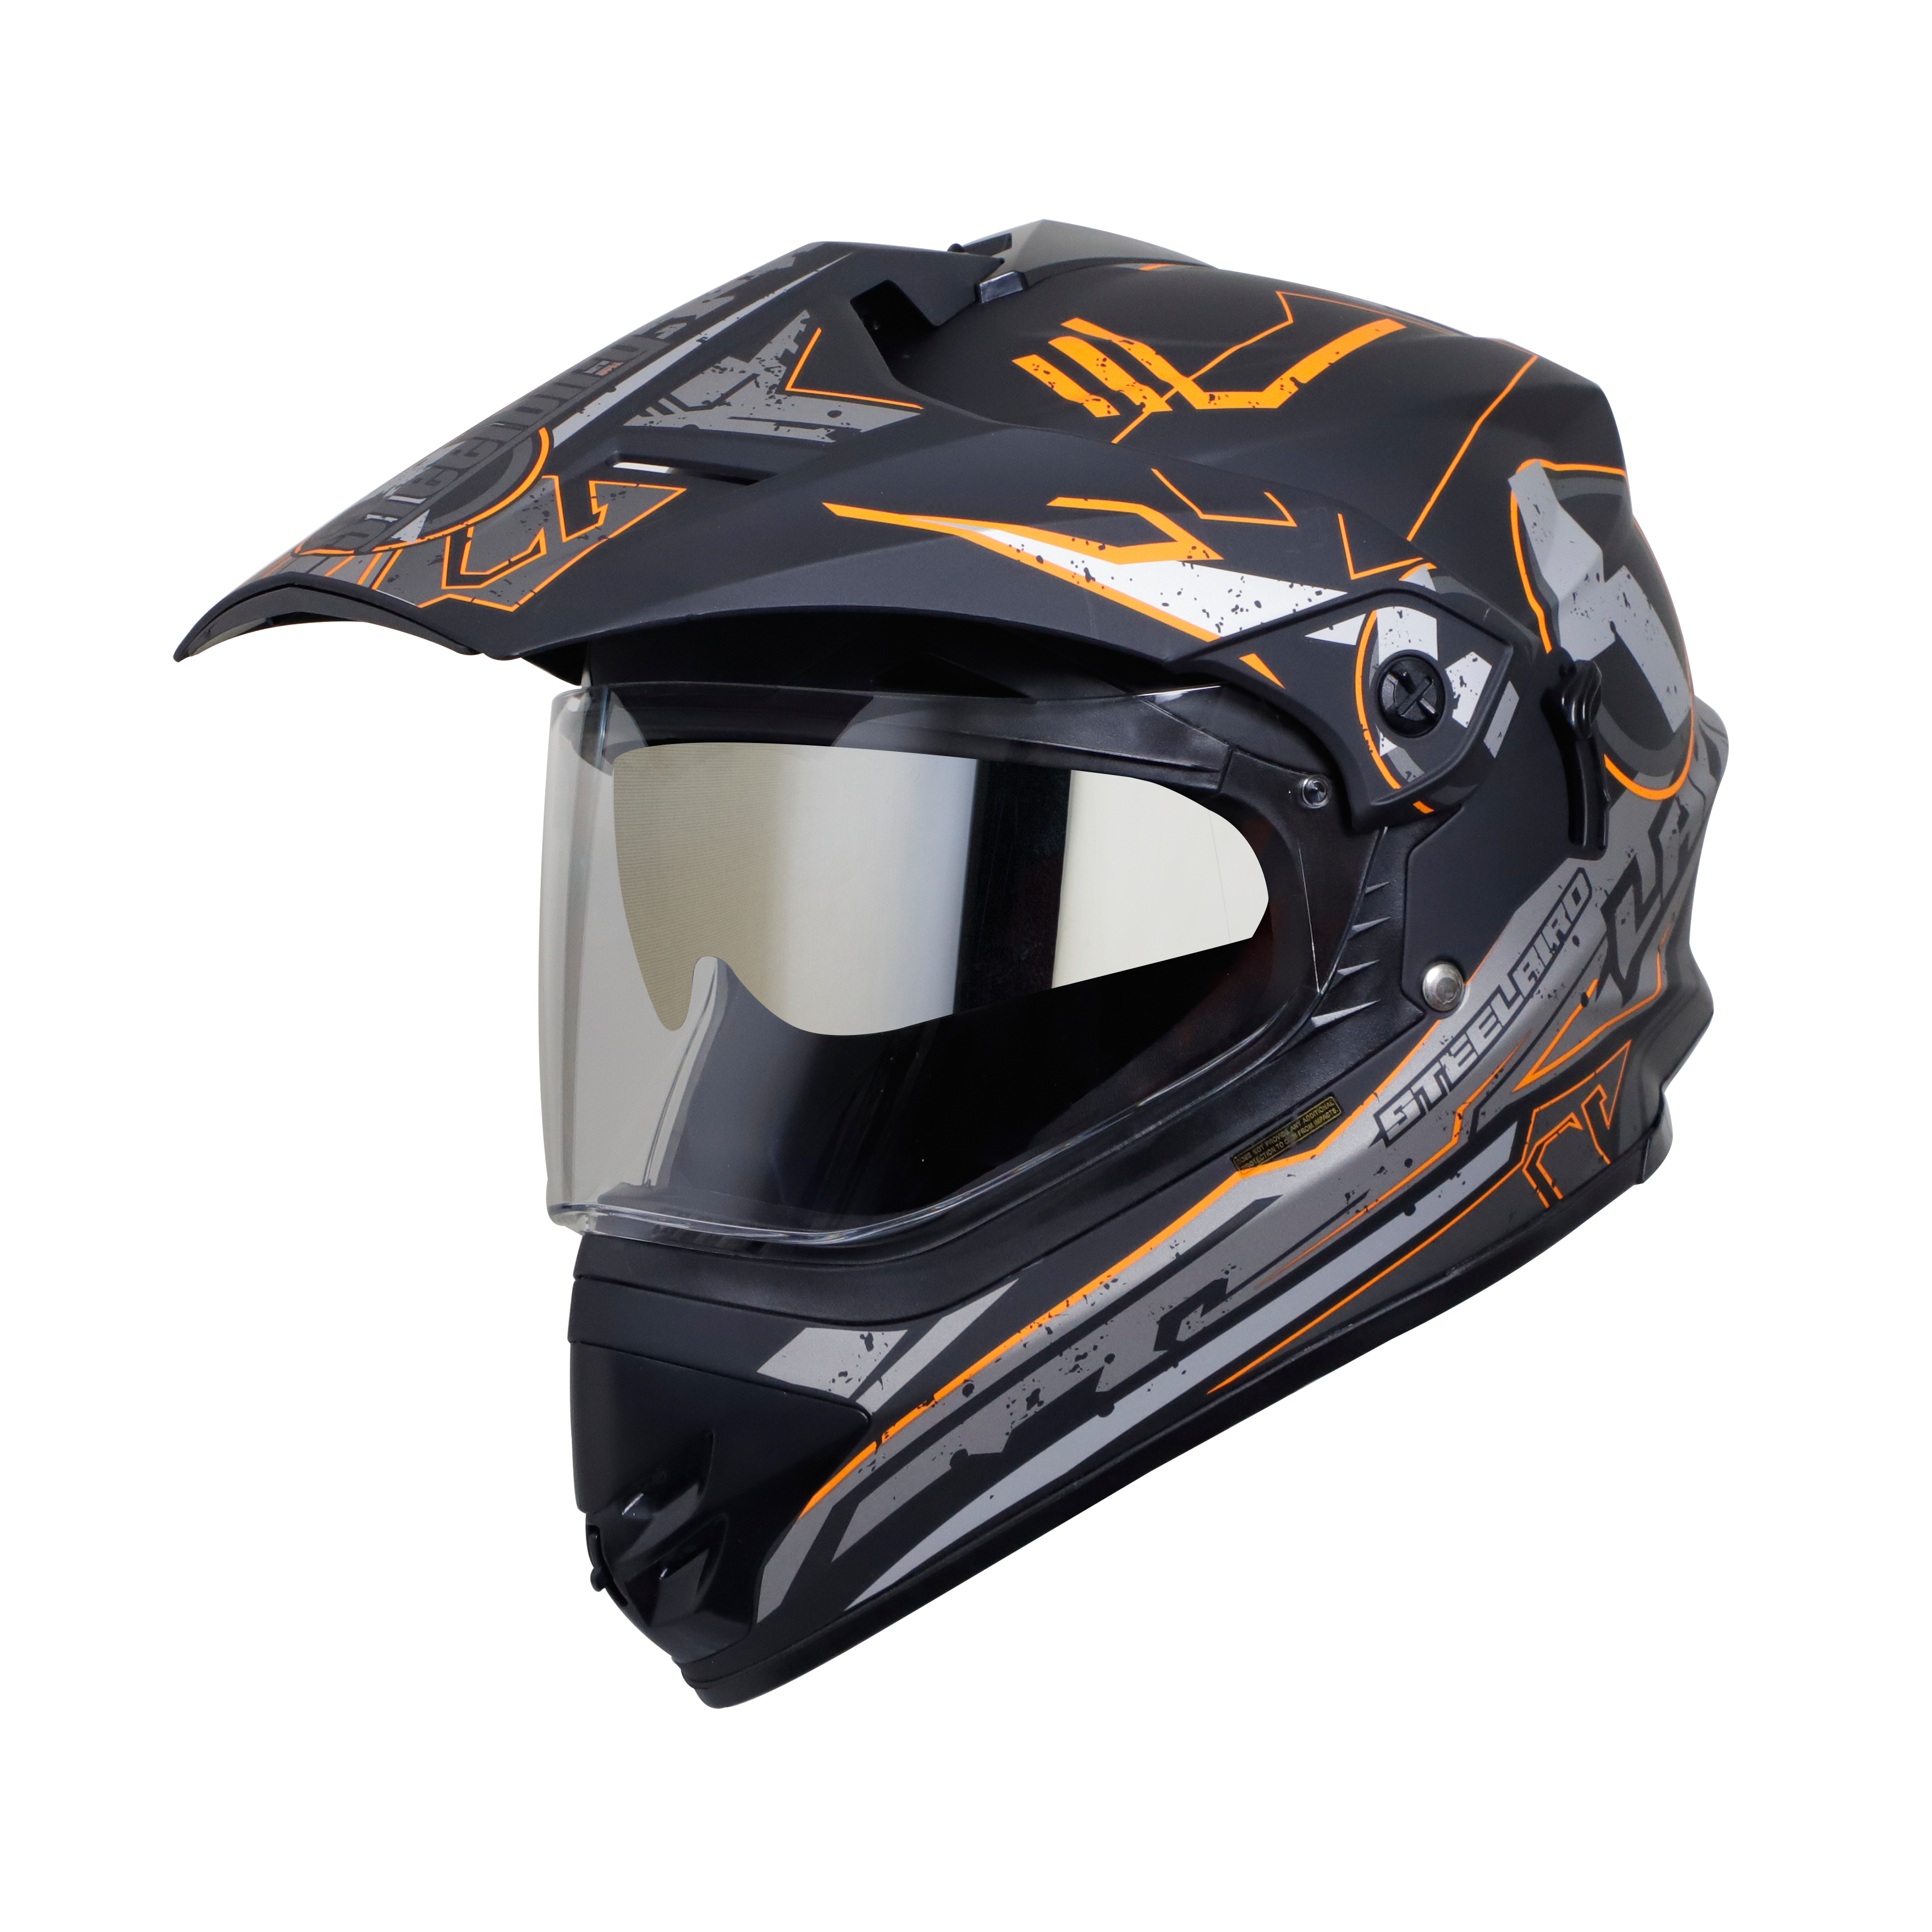 SB-42 BANG LAP GLOSSY BLACK WITH ORANGE (WITH CHROME SILVER INNER SUN SHIELD)